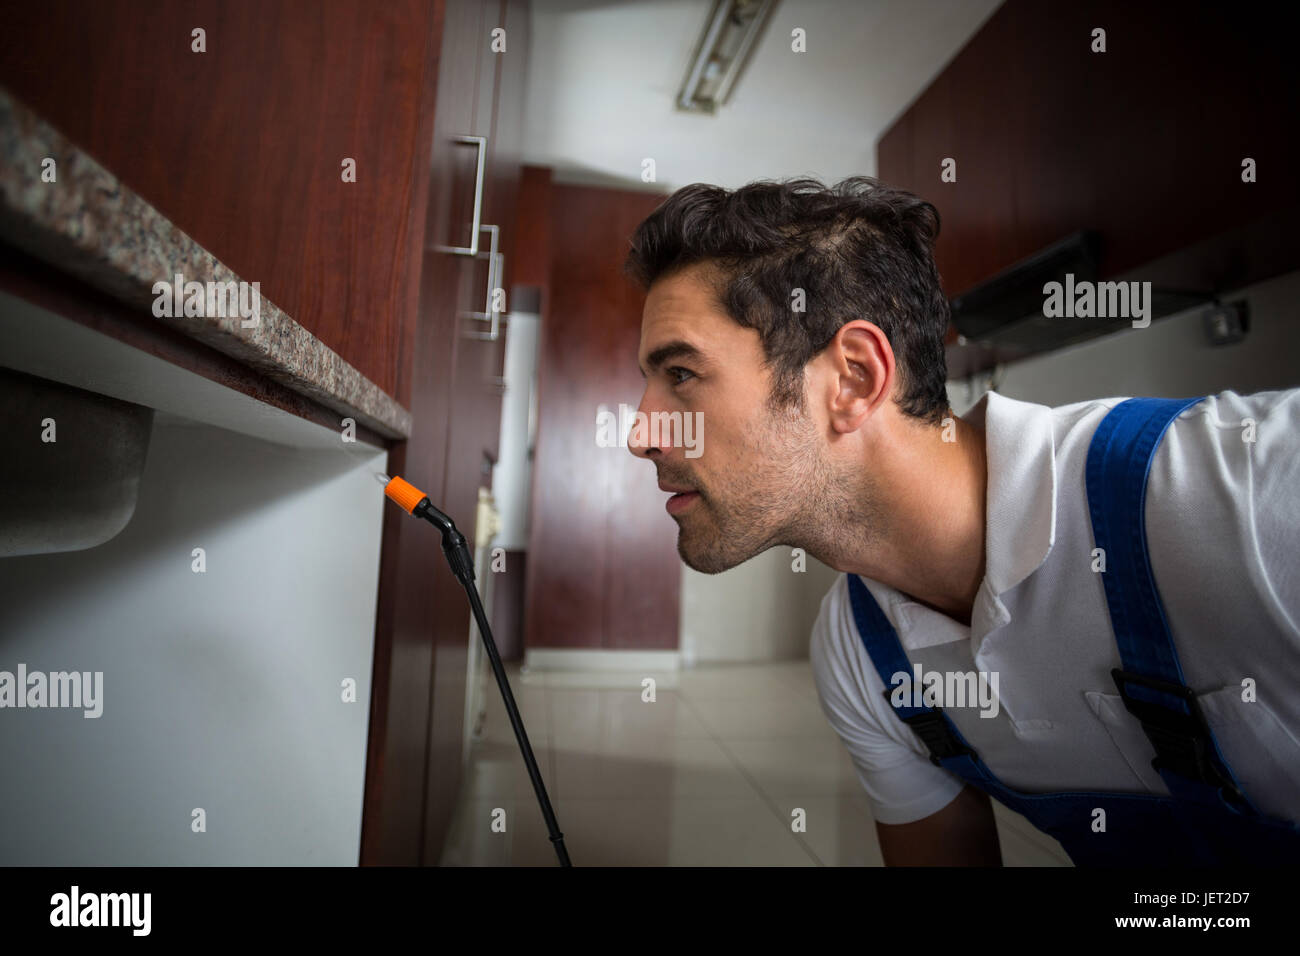 Manual worker concentration below sink Stock Photo